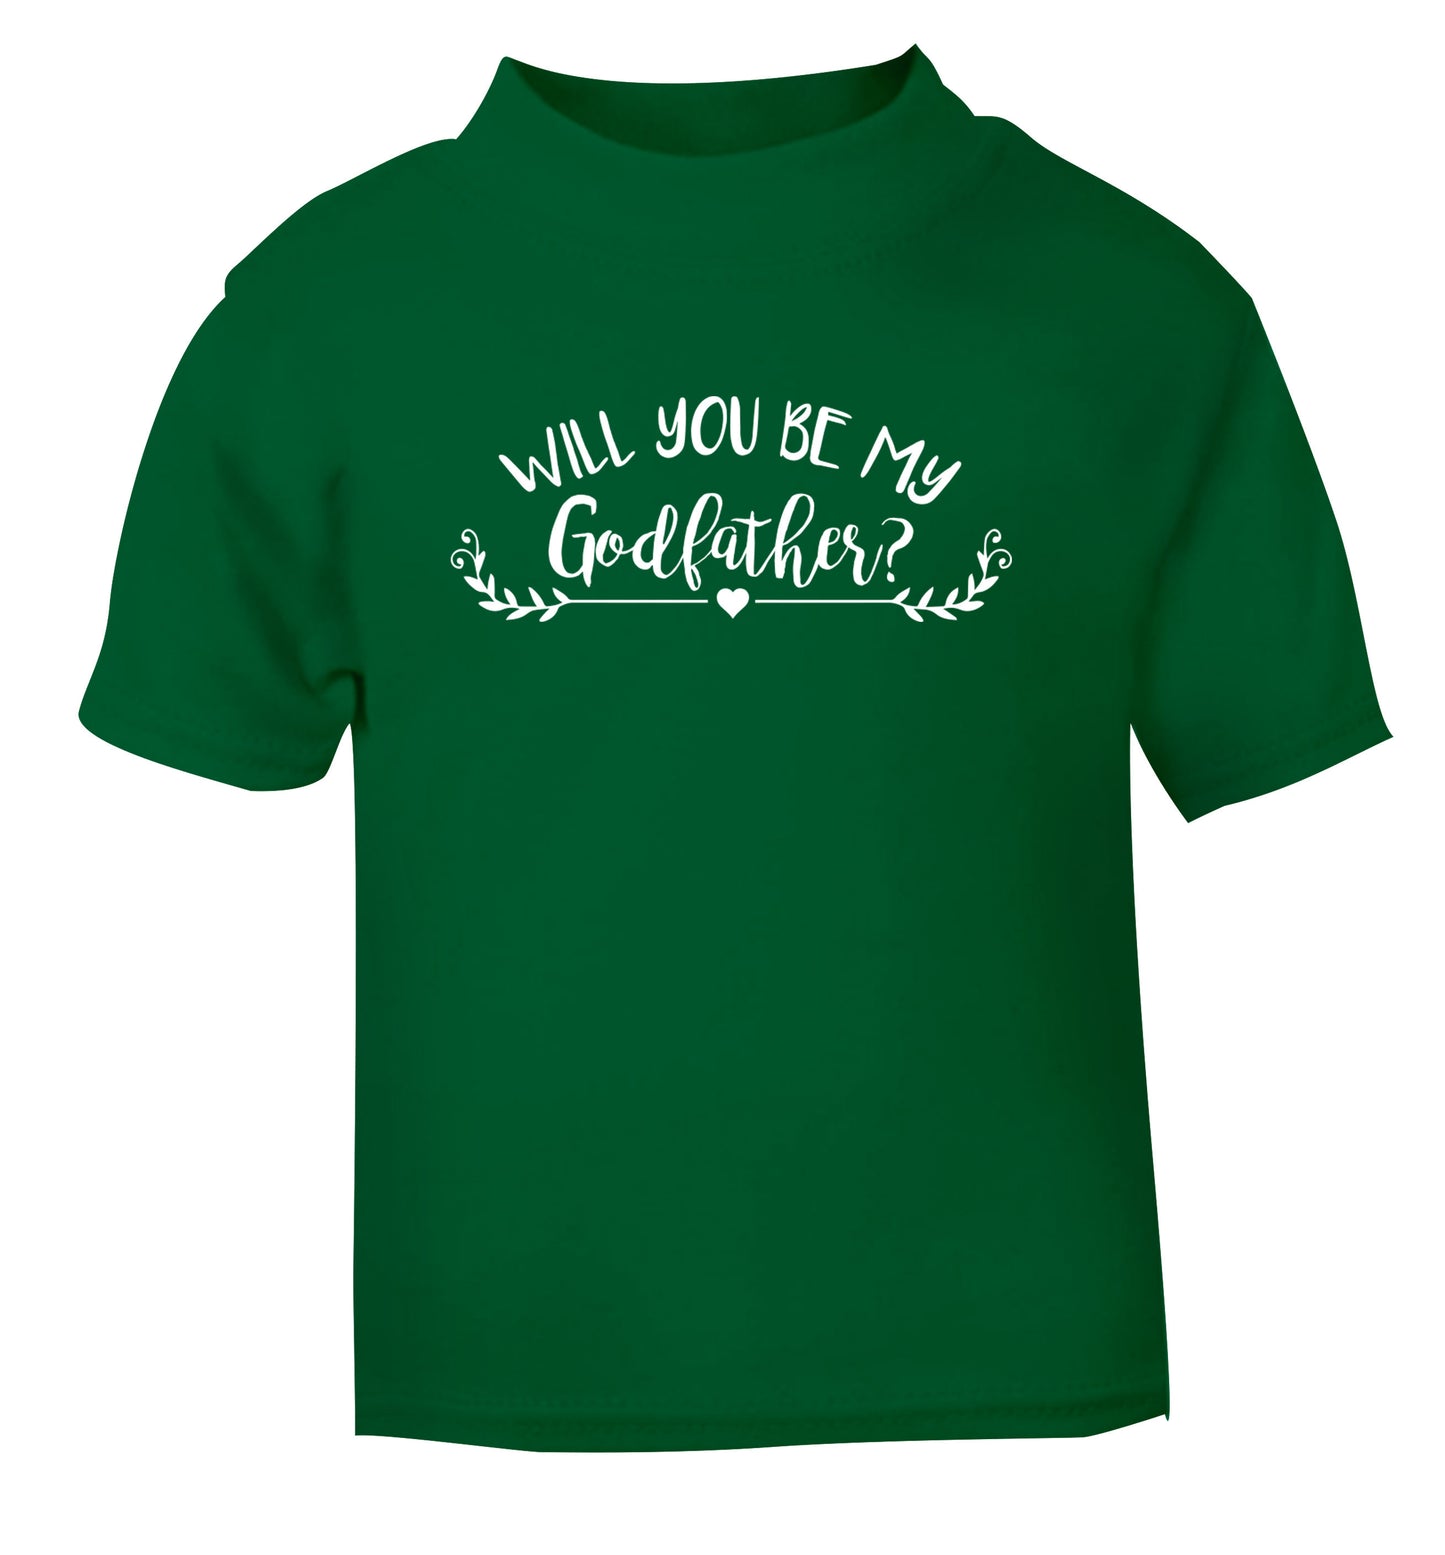 Will you be my godfather? green Baby Toddler Tshirt 2 Years